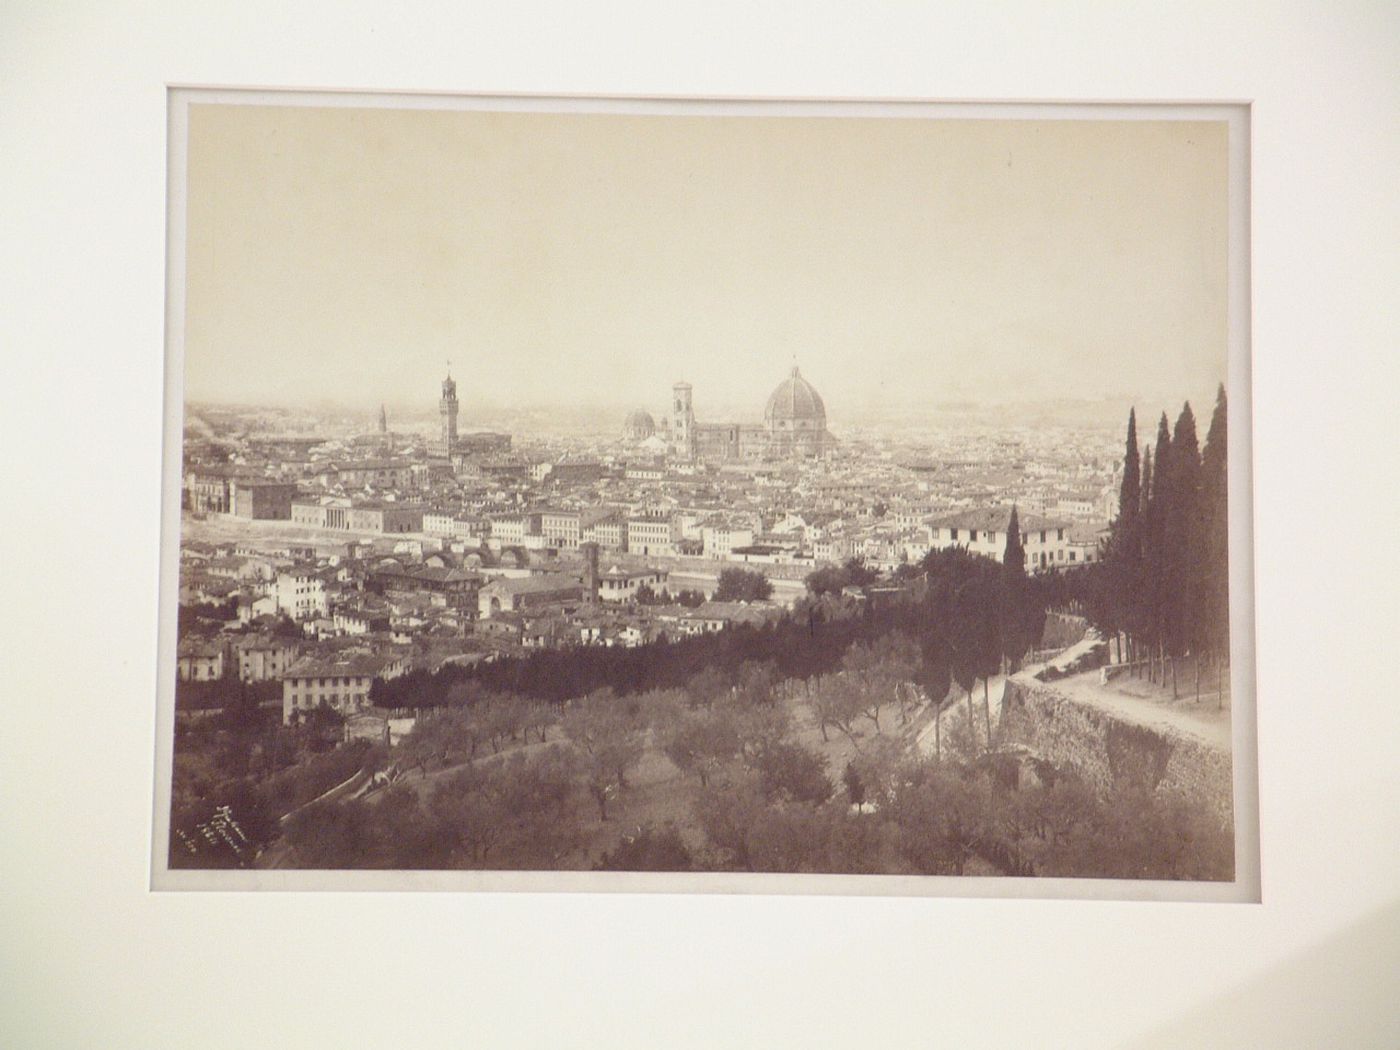 General view of San Miniato, including Duomo and Palazzo Vecchio, Florence, Italy